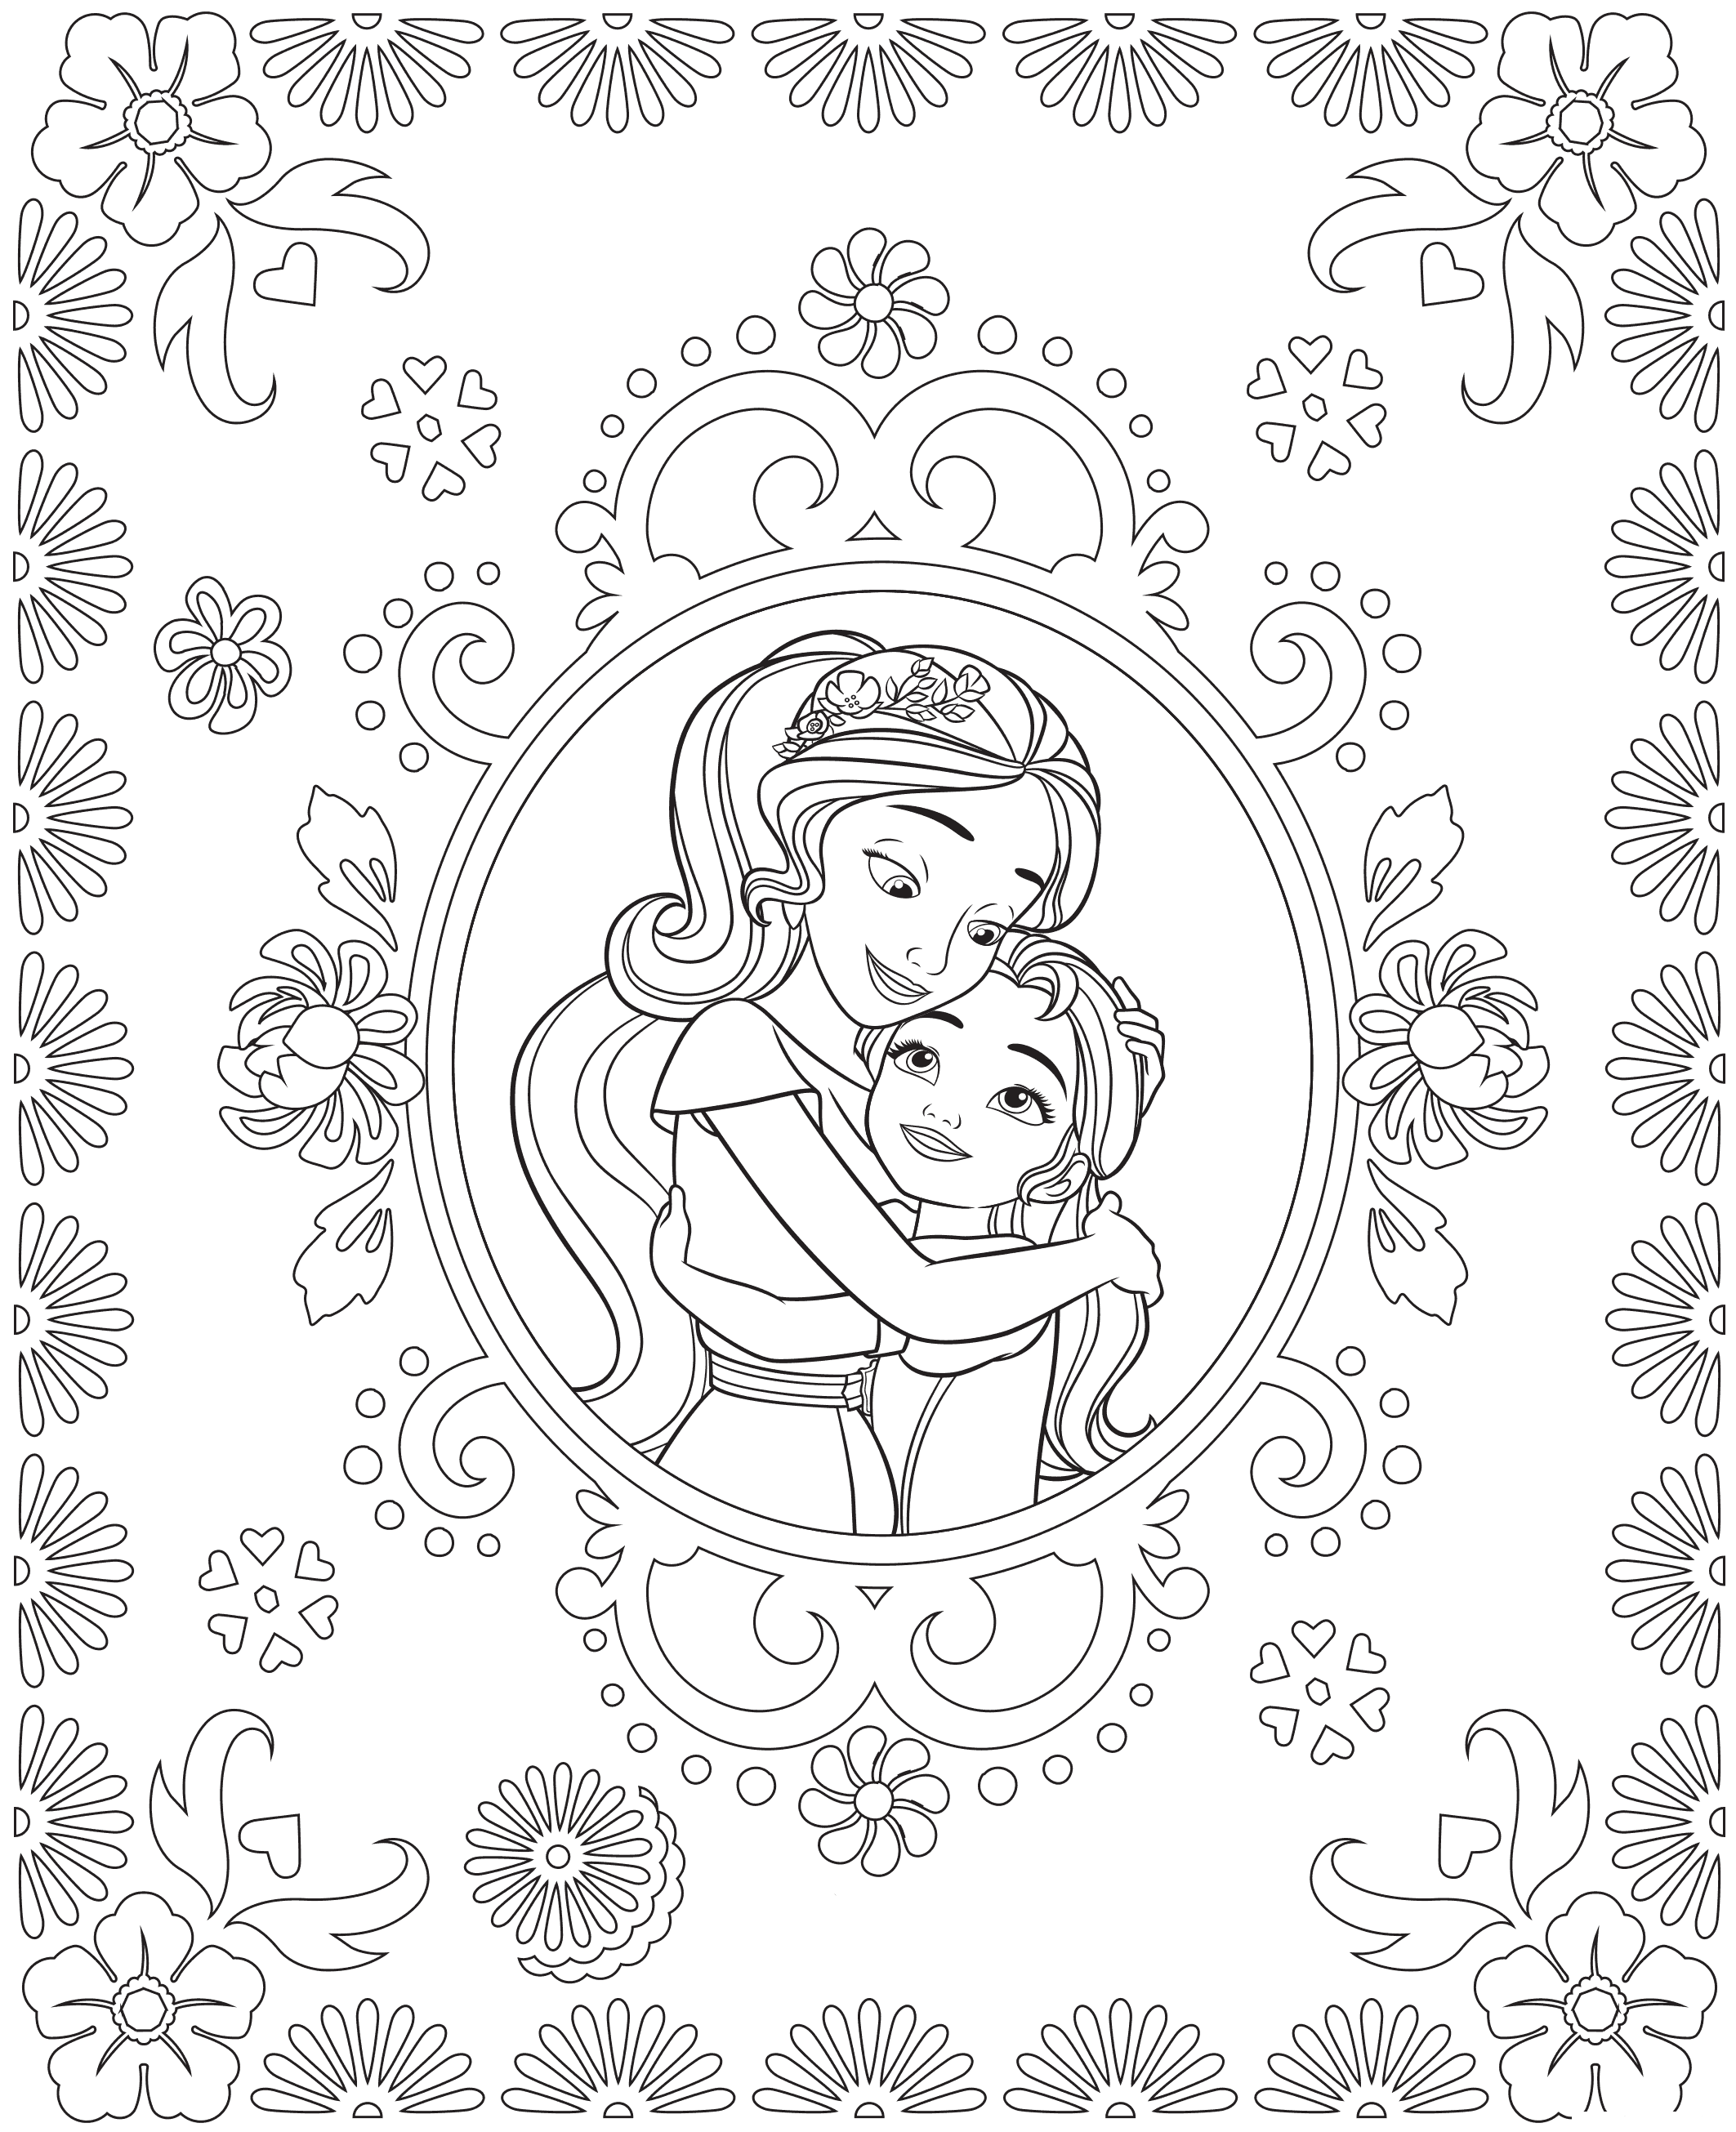 elena-of-avalor-coloring-pages-best-coloring-pages-for-kids